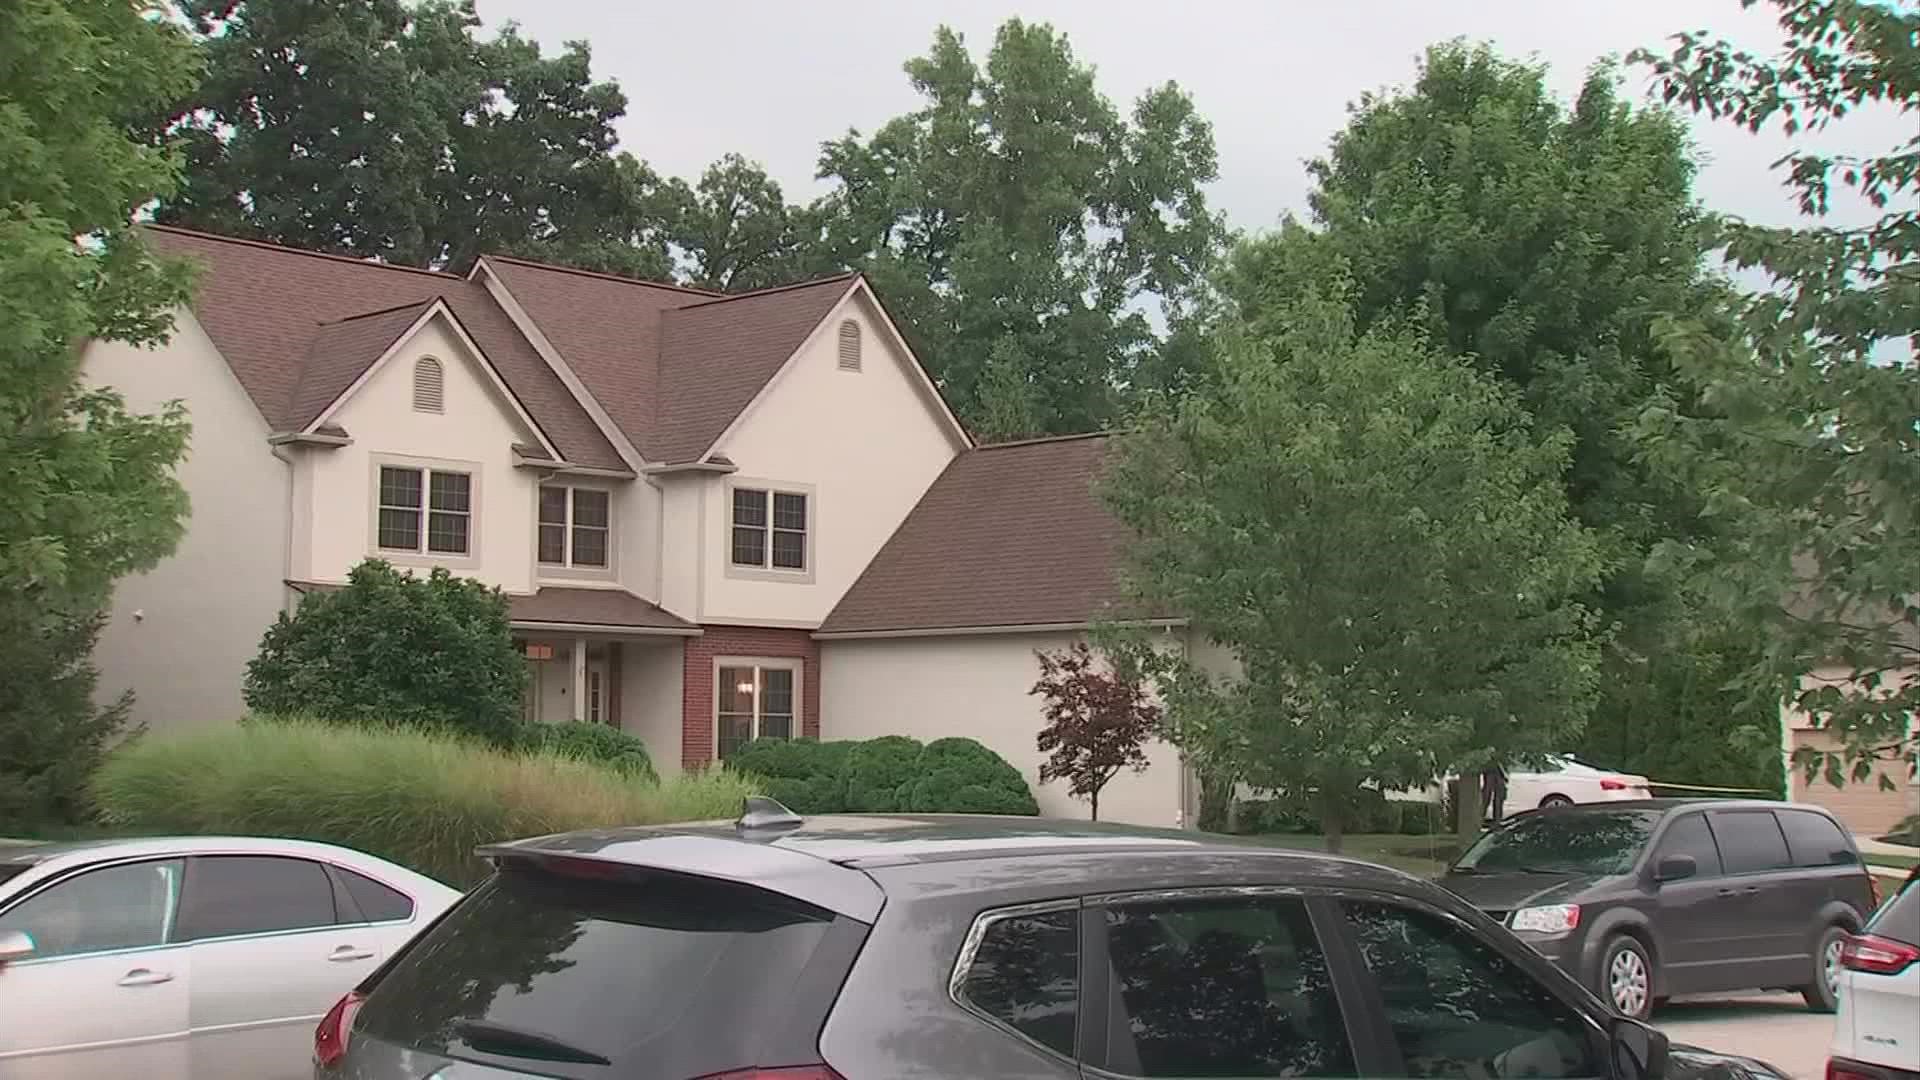 The Delaware County Sheriff's office identified the father and his 14-year-old son who were found dead inside the home.